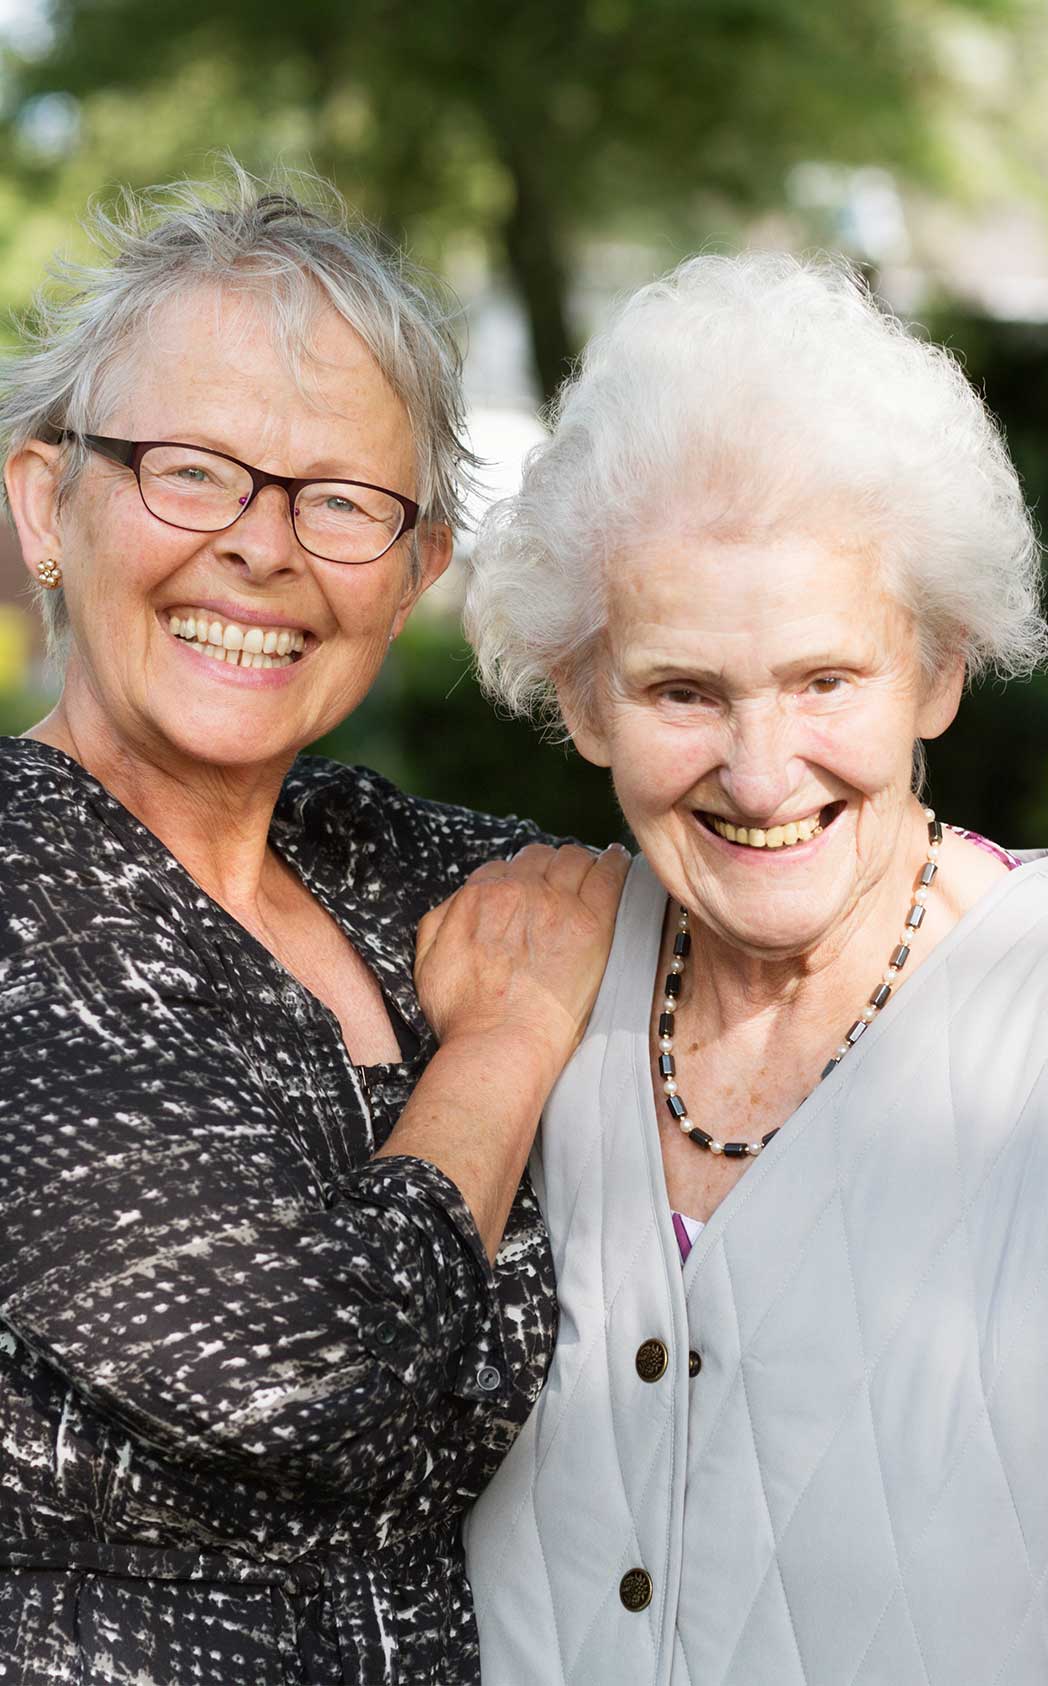 Two happy elderly women, one with her hand on the other's shoulder, smile for their photo to be taken.